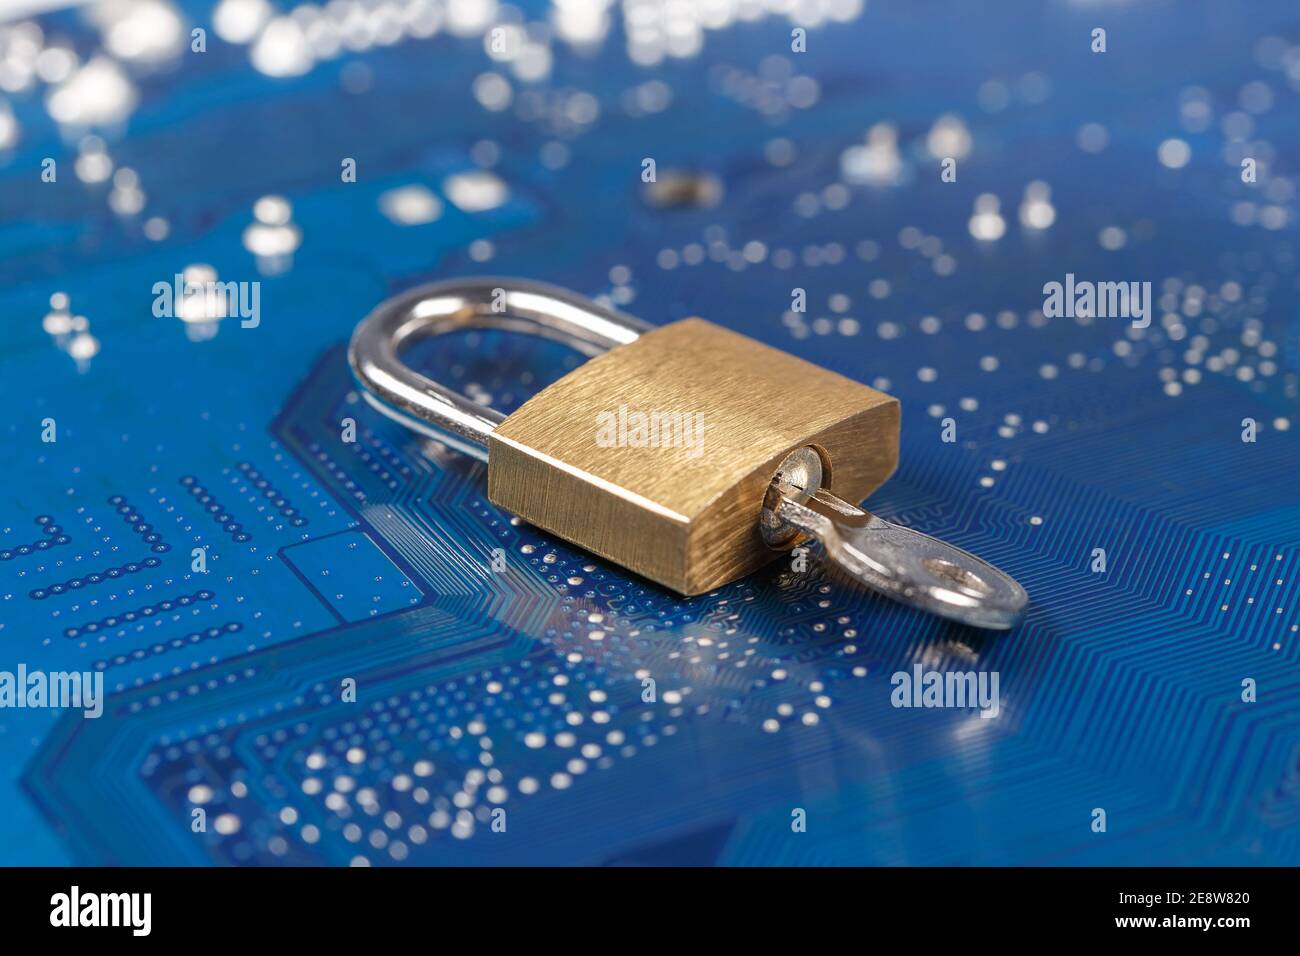 Padlock with key on blue PCB. The concept of encryption, information protection, data safety. Stock Photo